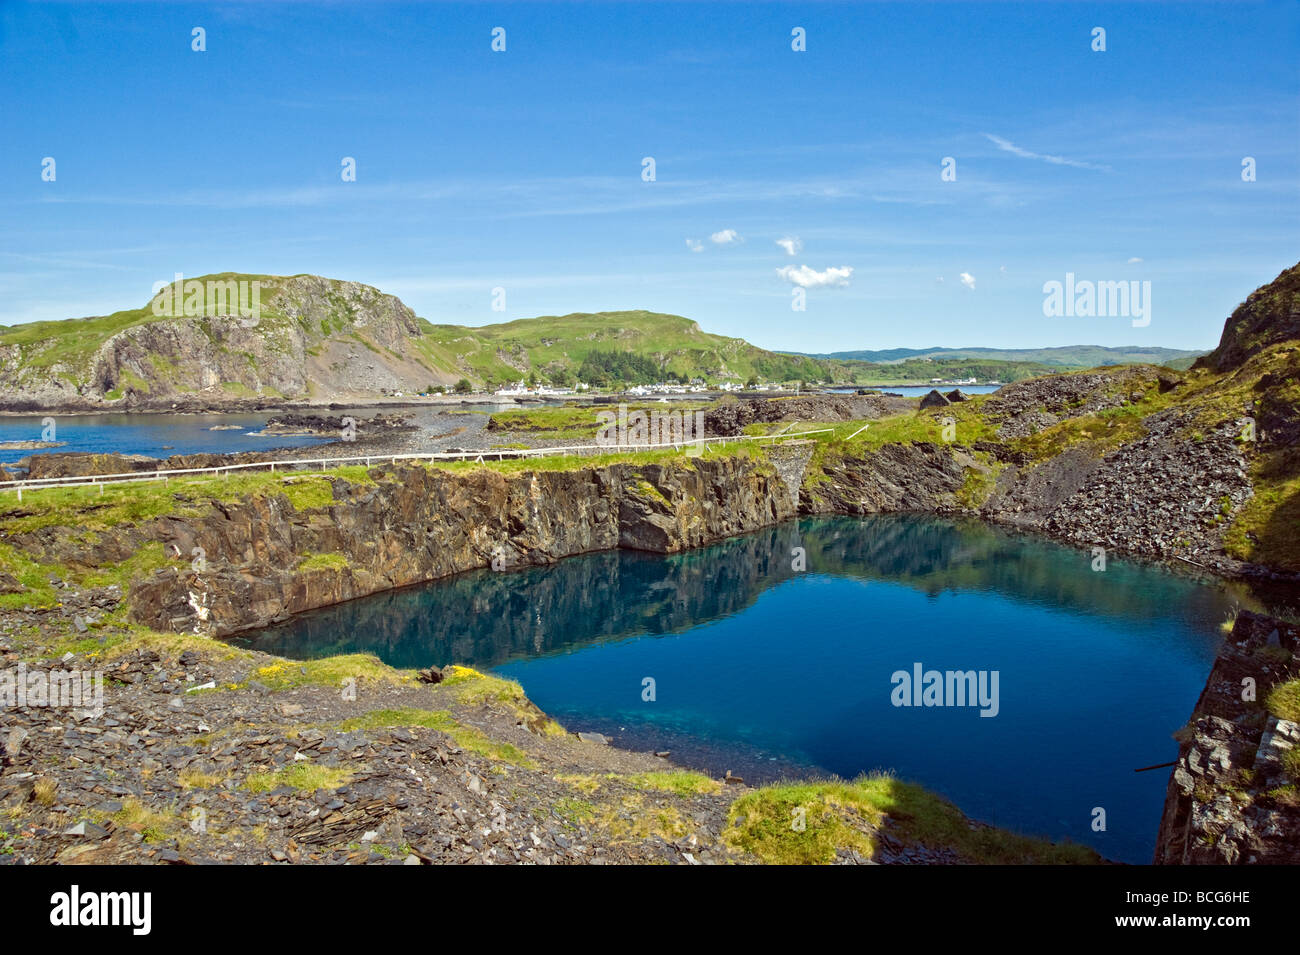 General view of Easdale on Seil in the Background from the disused slate quarries on the Island of Isdale in Scotland. Stock Photo